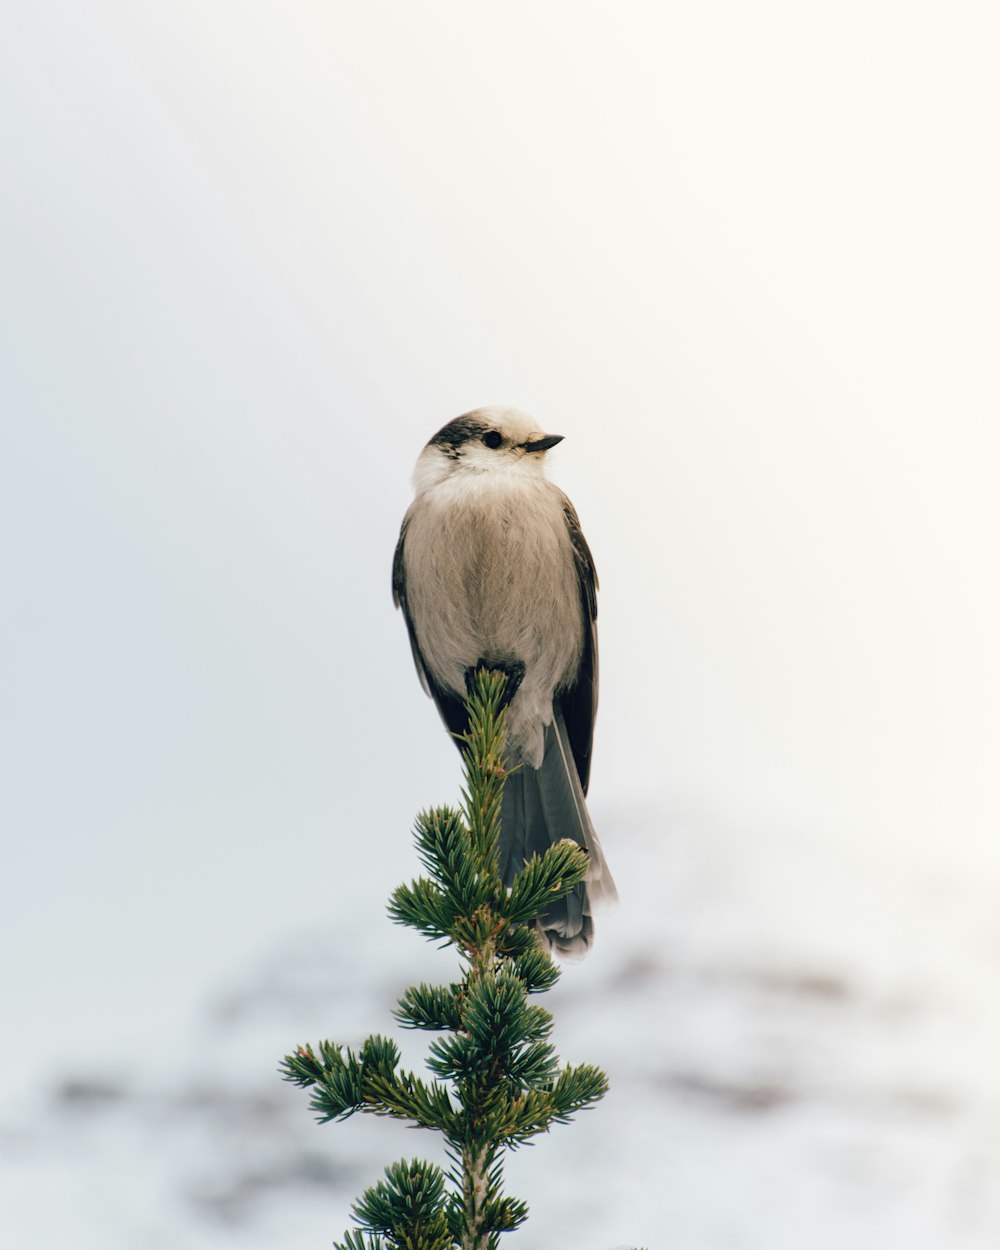 white and black bird perched on green twig during daytime